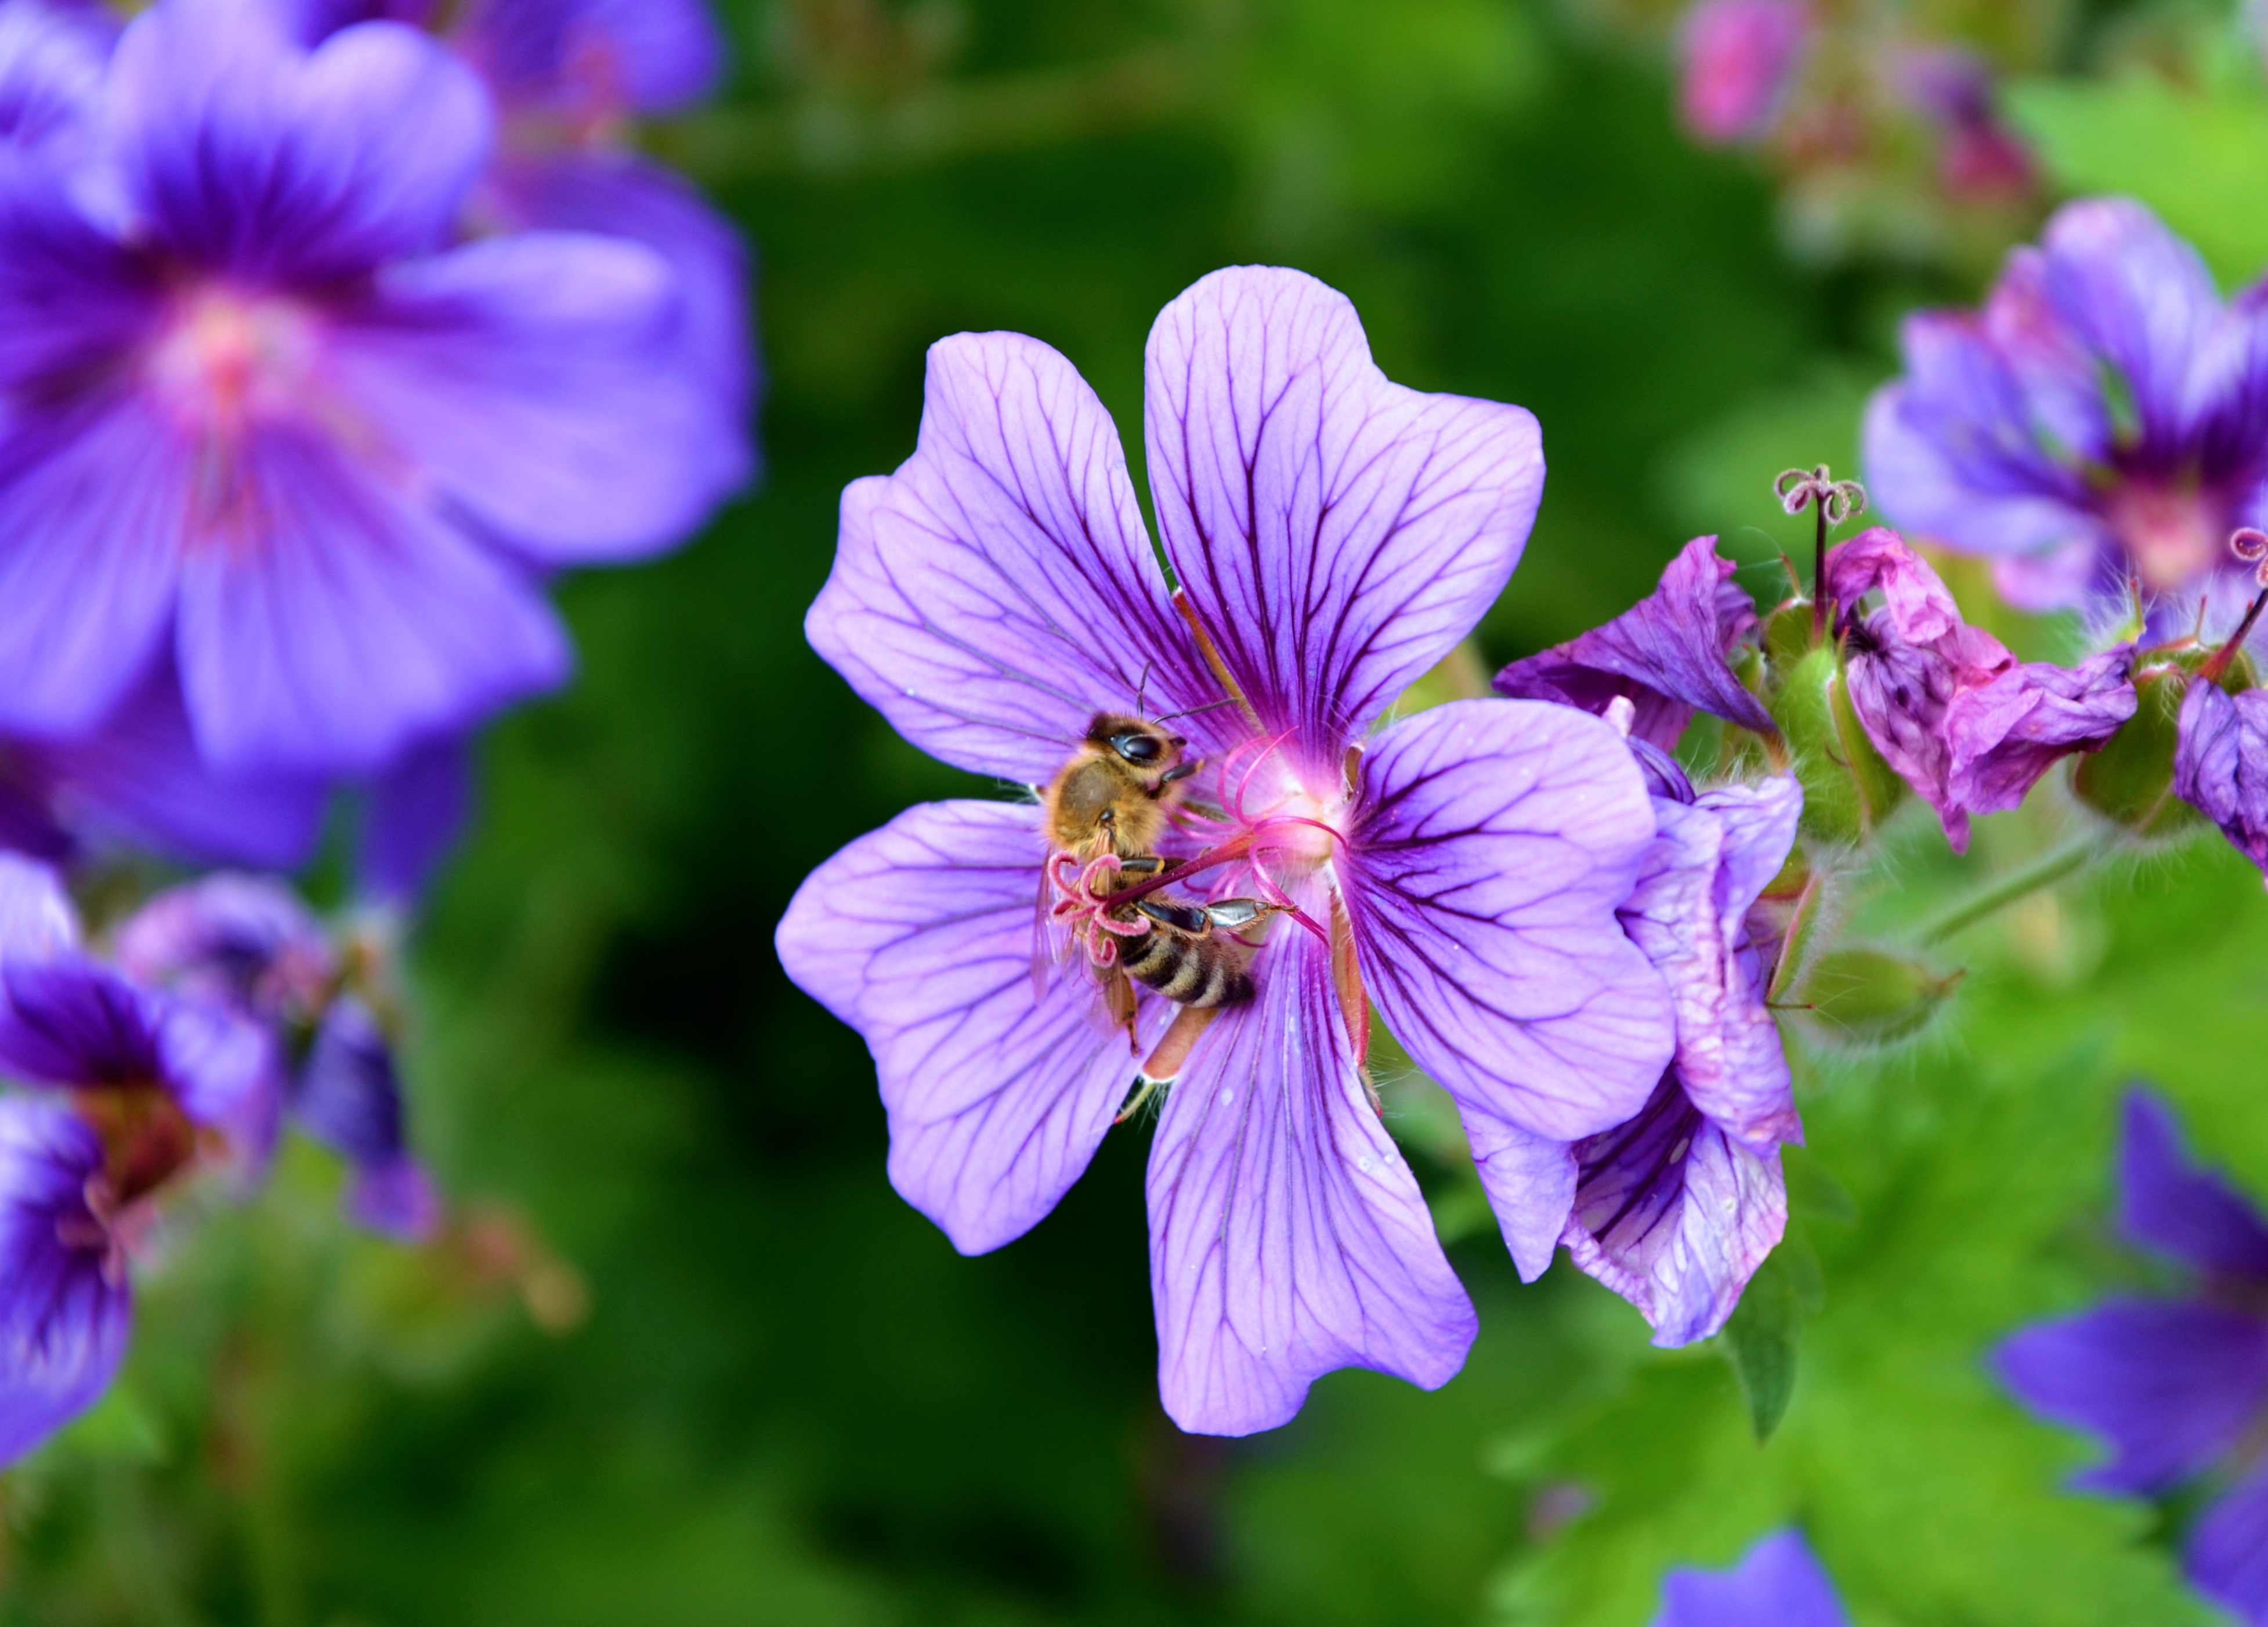 126701 download wallpaper flower, macro, bee, pollen, nectar screensavers and pictures for free